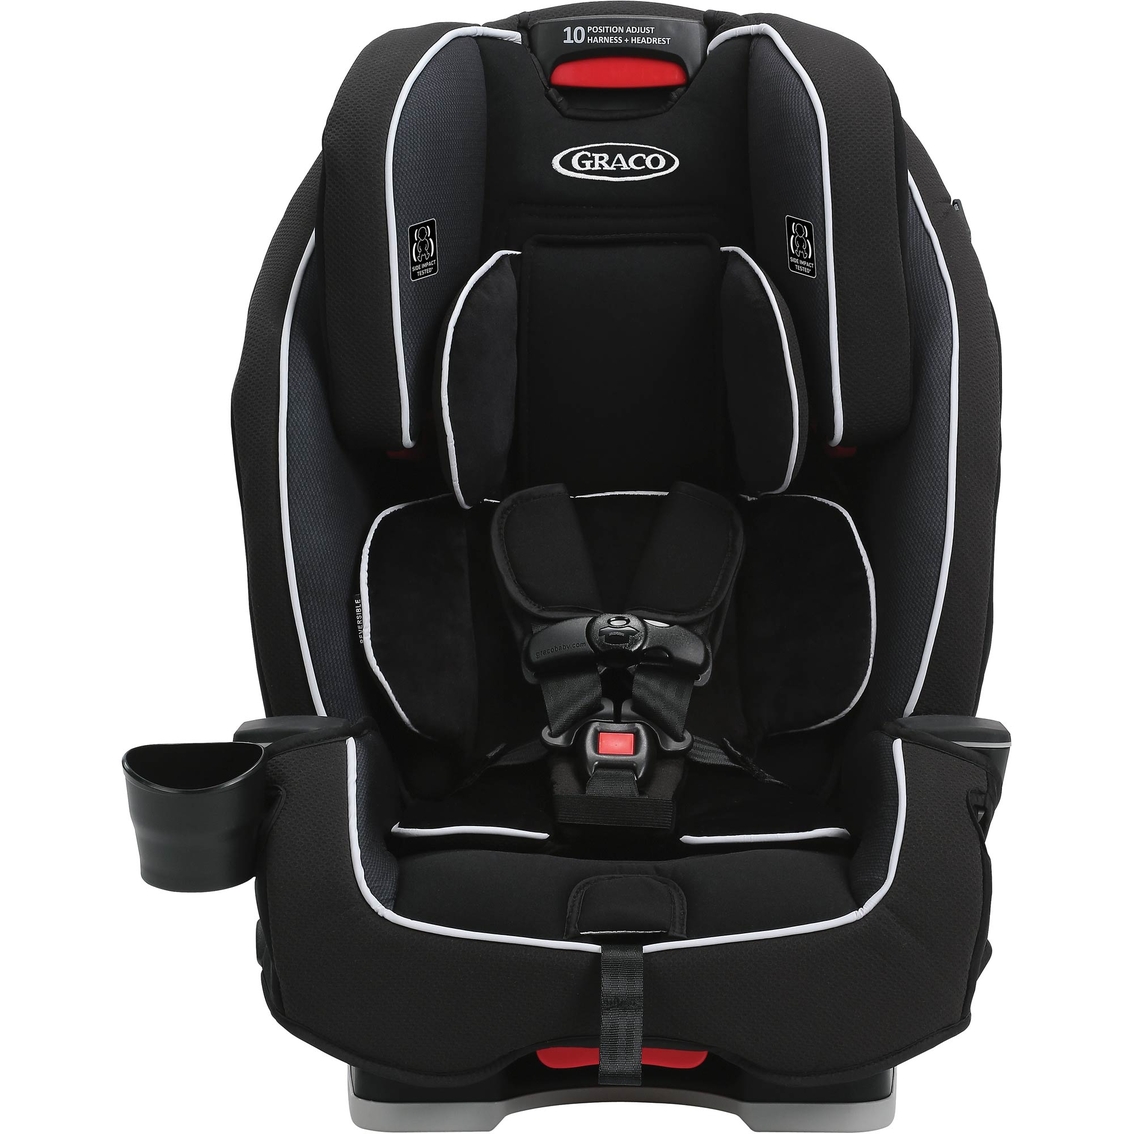 Graco Milestone All-in-1 Car Seat - Image 2 of 4